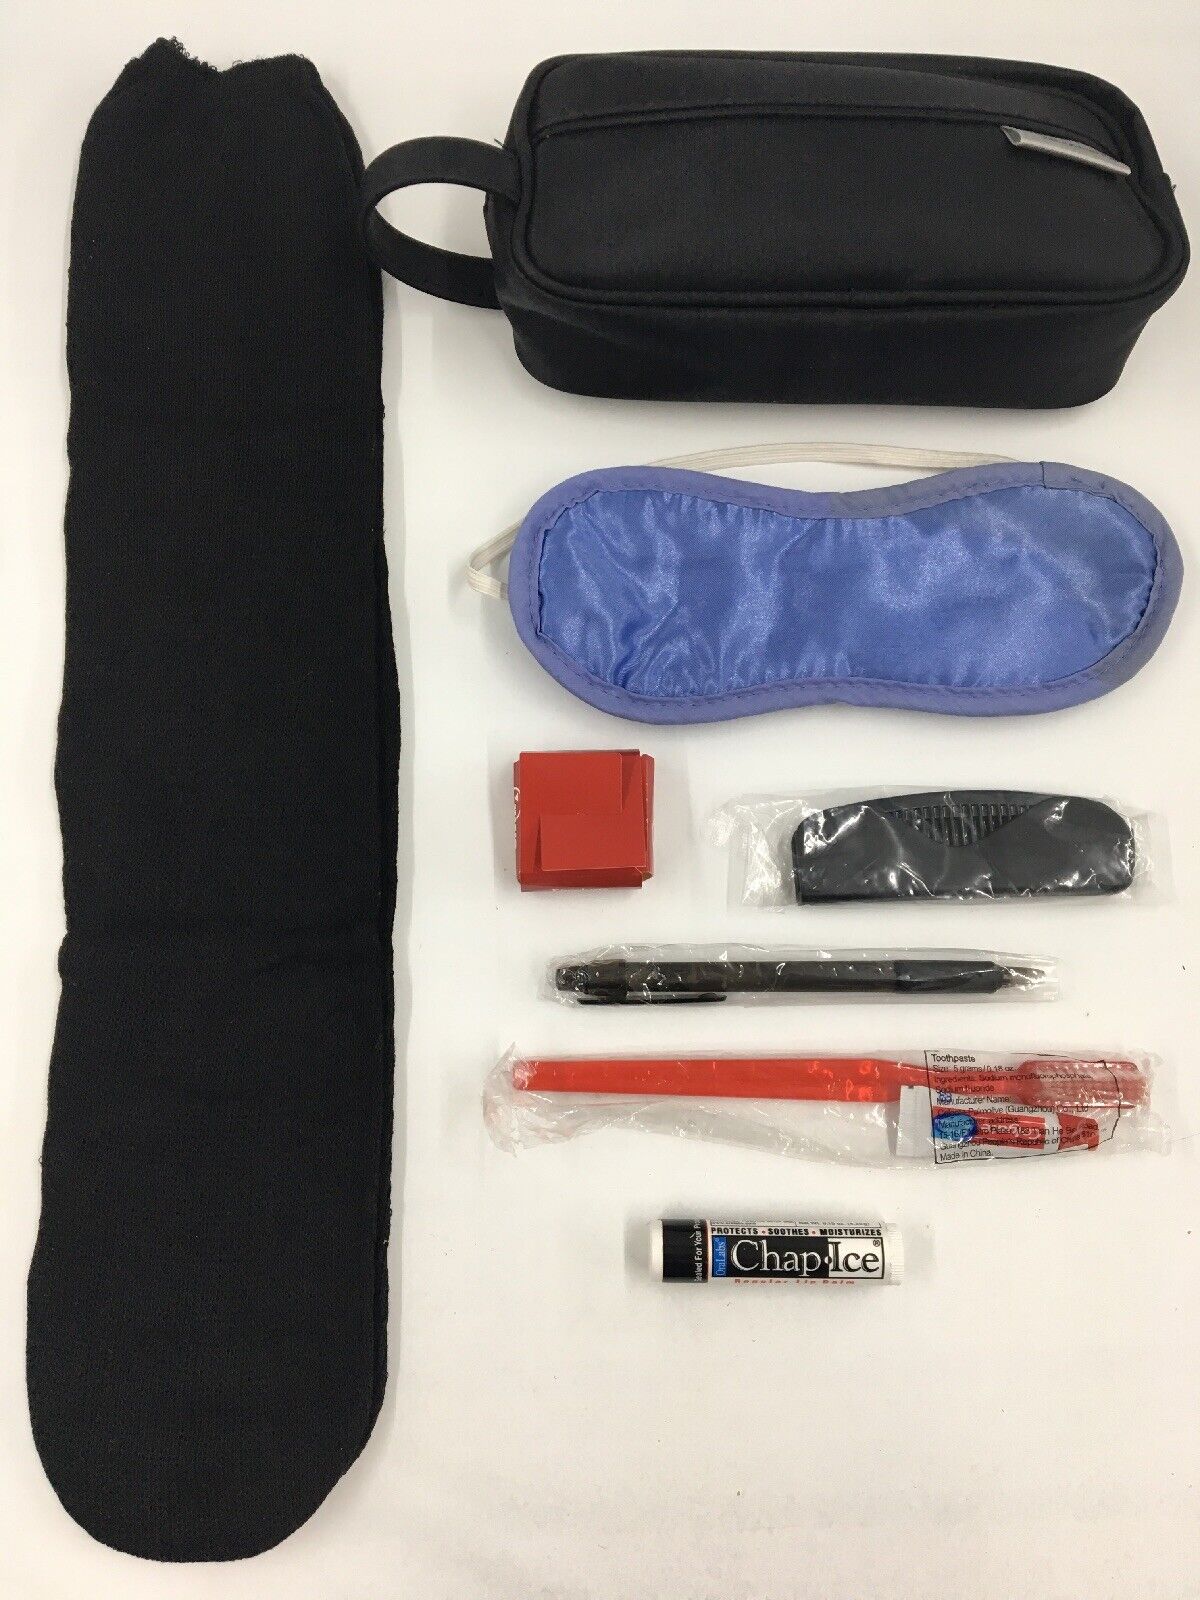 NWA KLM Toiletry Kit Unused Complete 7 Items Plus Bag Pre-merger With Delta